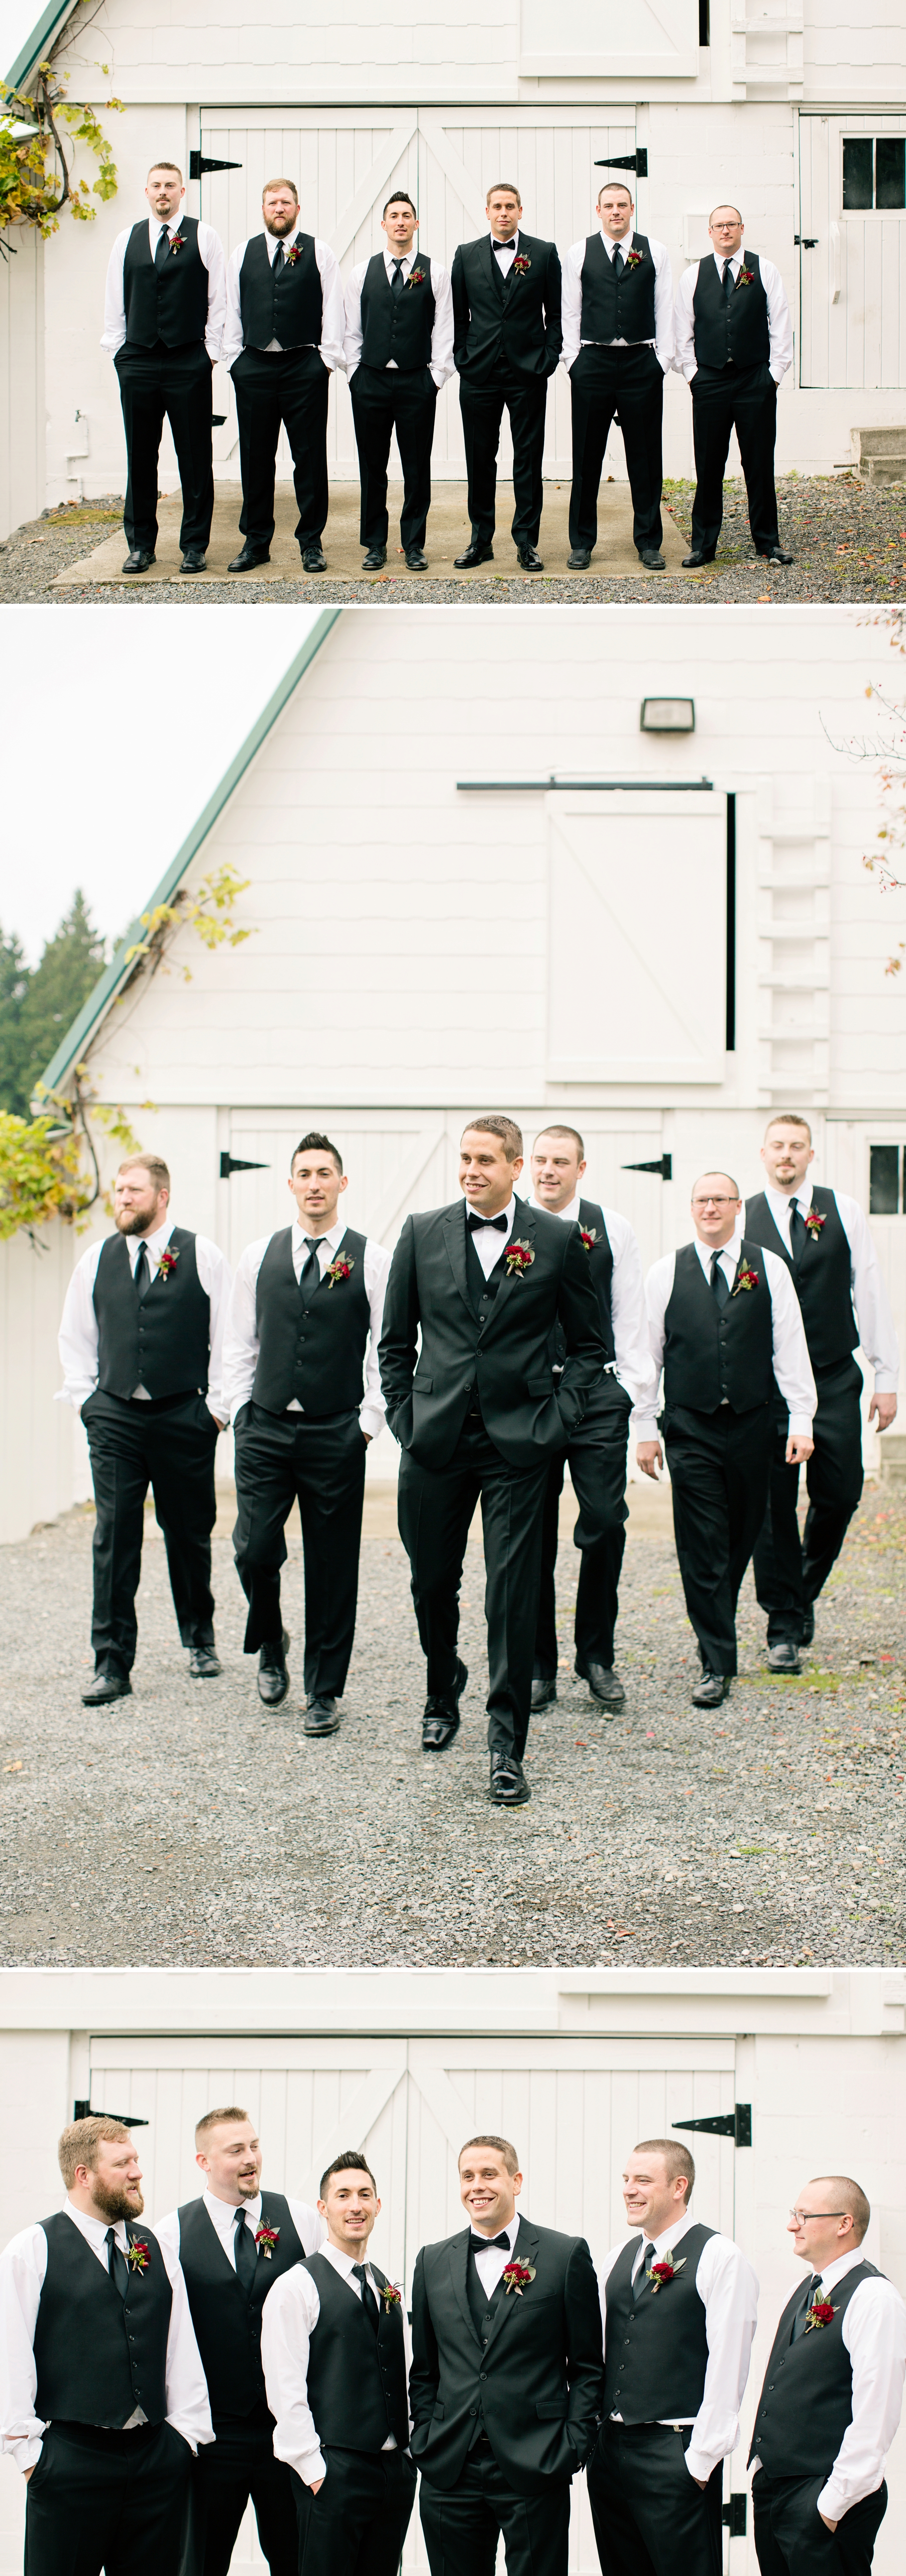 20-Groom-Groomsmen-Portraits-Barn-Delille-Cellars-Chateau-Vineyard-Woodinville-Wedding-Photographer-Photography-by-Betty-Elaine